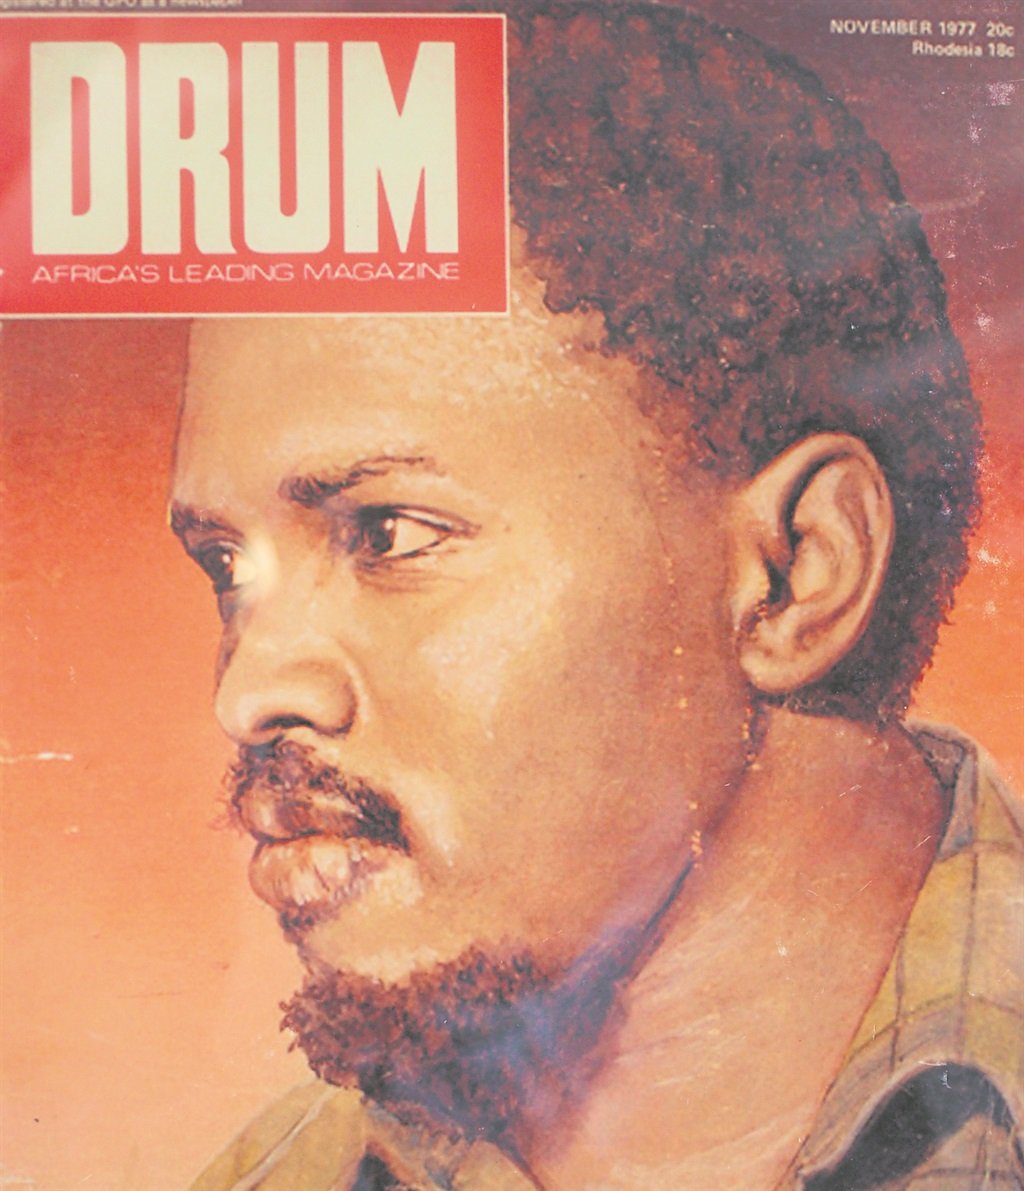 Steve Biko graces the cover of Drum magazine, as he would today if he were alive. Photo: Drum Magazine